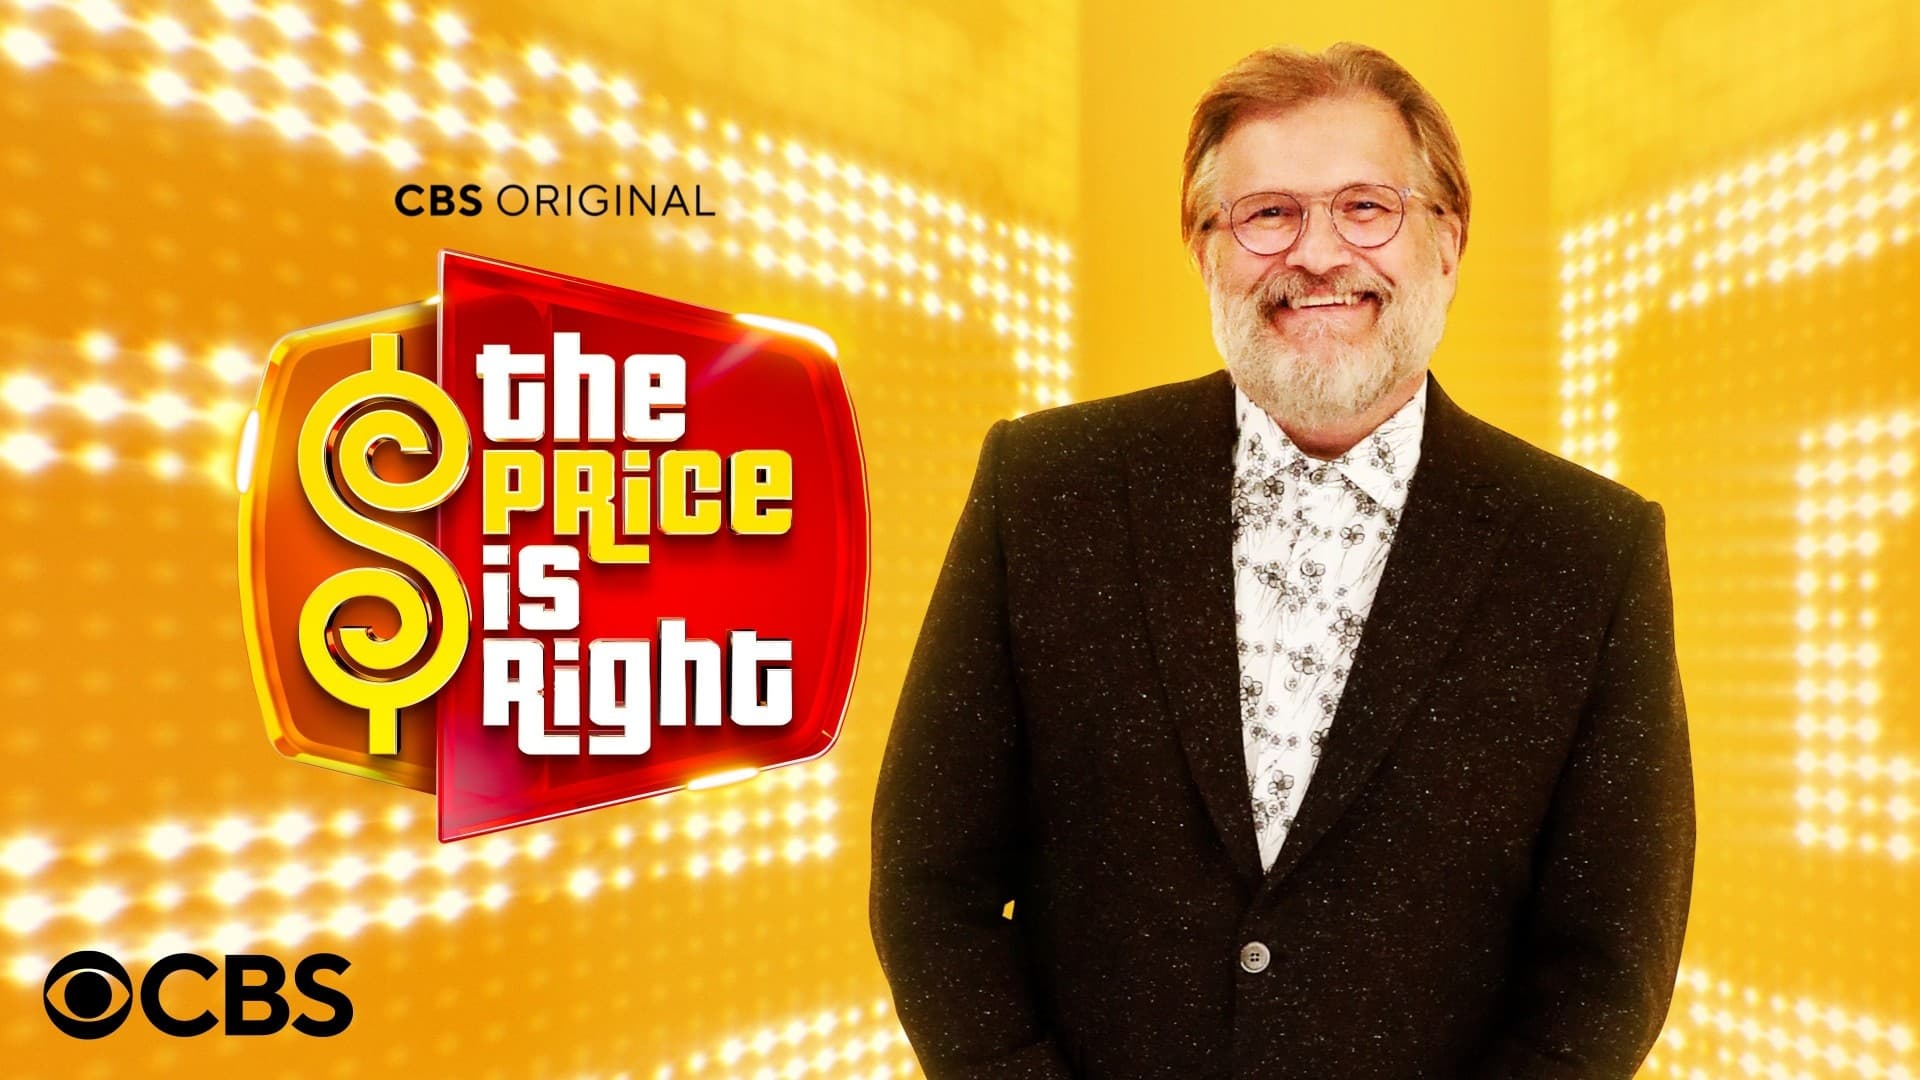 The Price Is Right - Season 6 Episode 11 : The Price Is Right Season 6 Episode 11